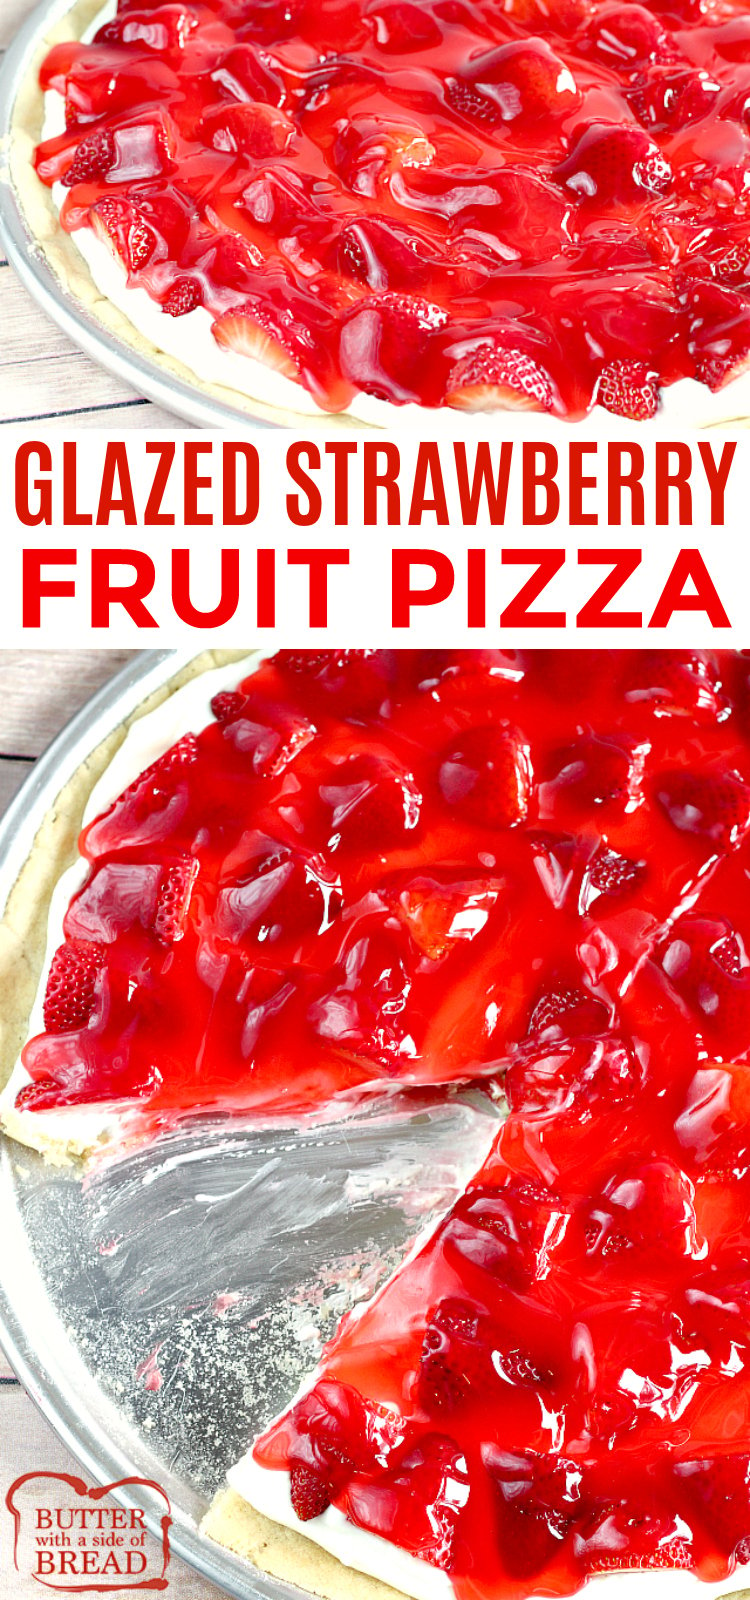 Glazed Strawberry Fruit Pizza is made with a sugar cookie crust that is topped with a cream cheese layer, fresh strawberries and a delicious strawberry glaze! This fruit pizza recipe is so easy to make by using pre-made sugar cookie dough and the glaze is made with strawberry jello and a few other basic ingredients.